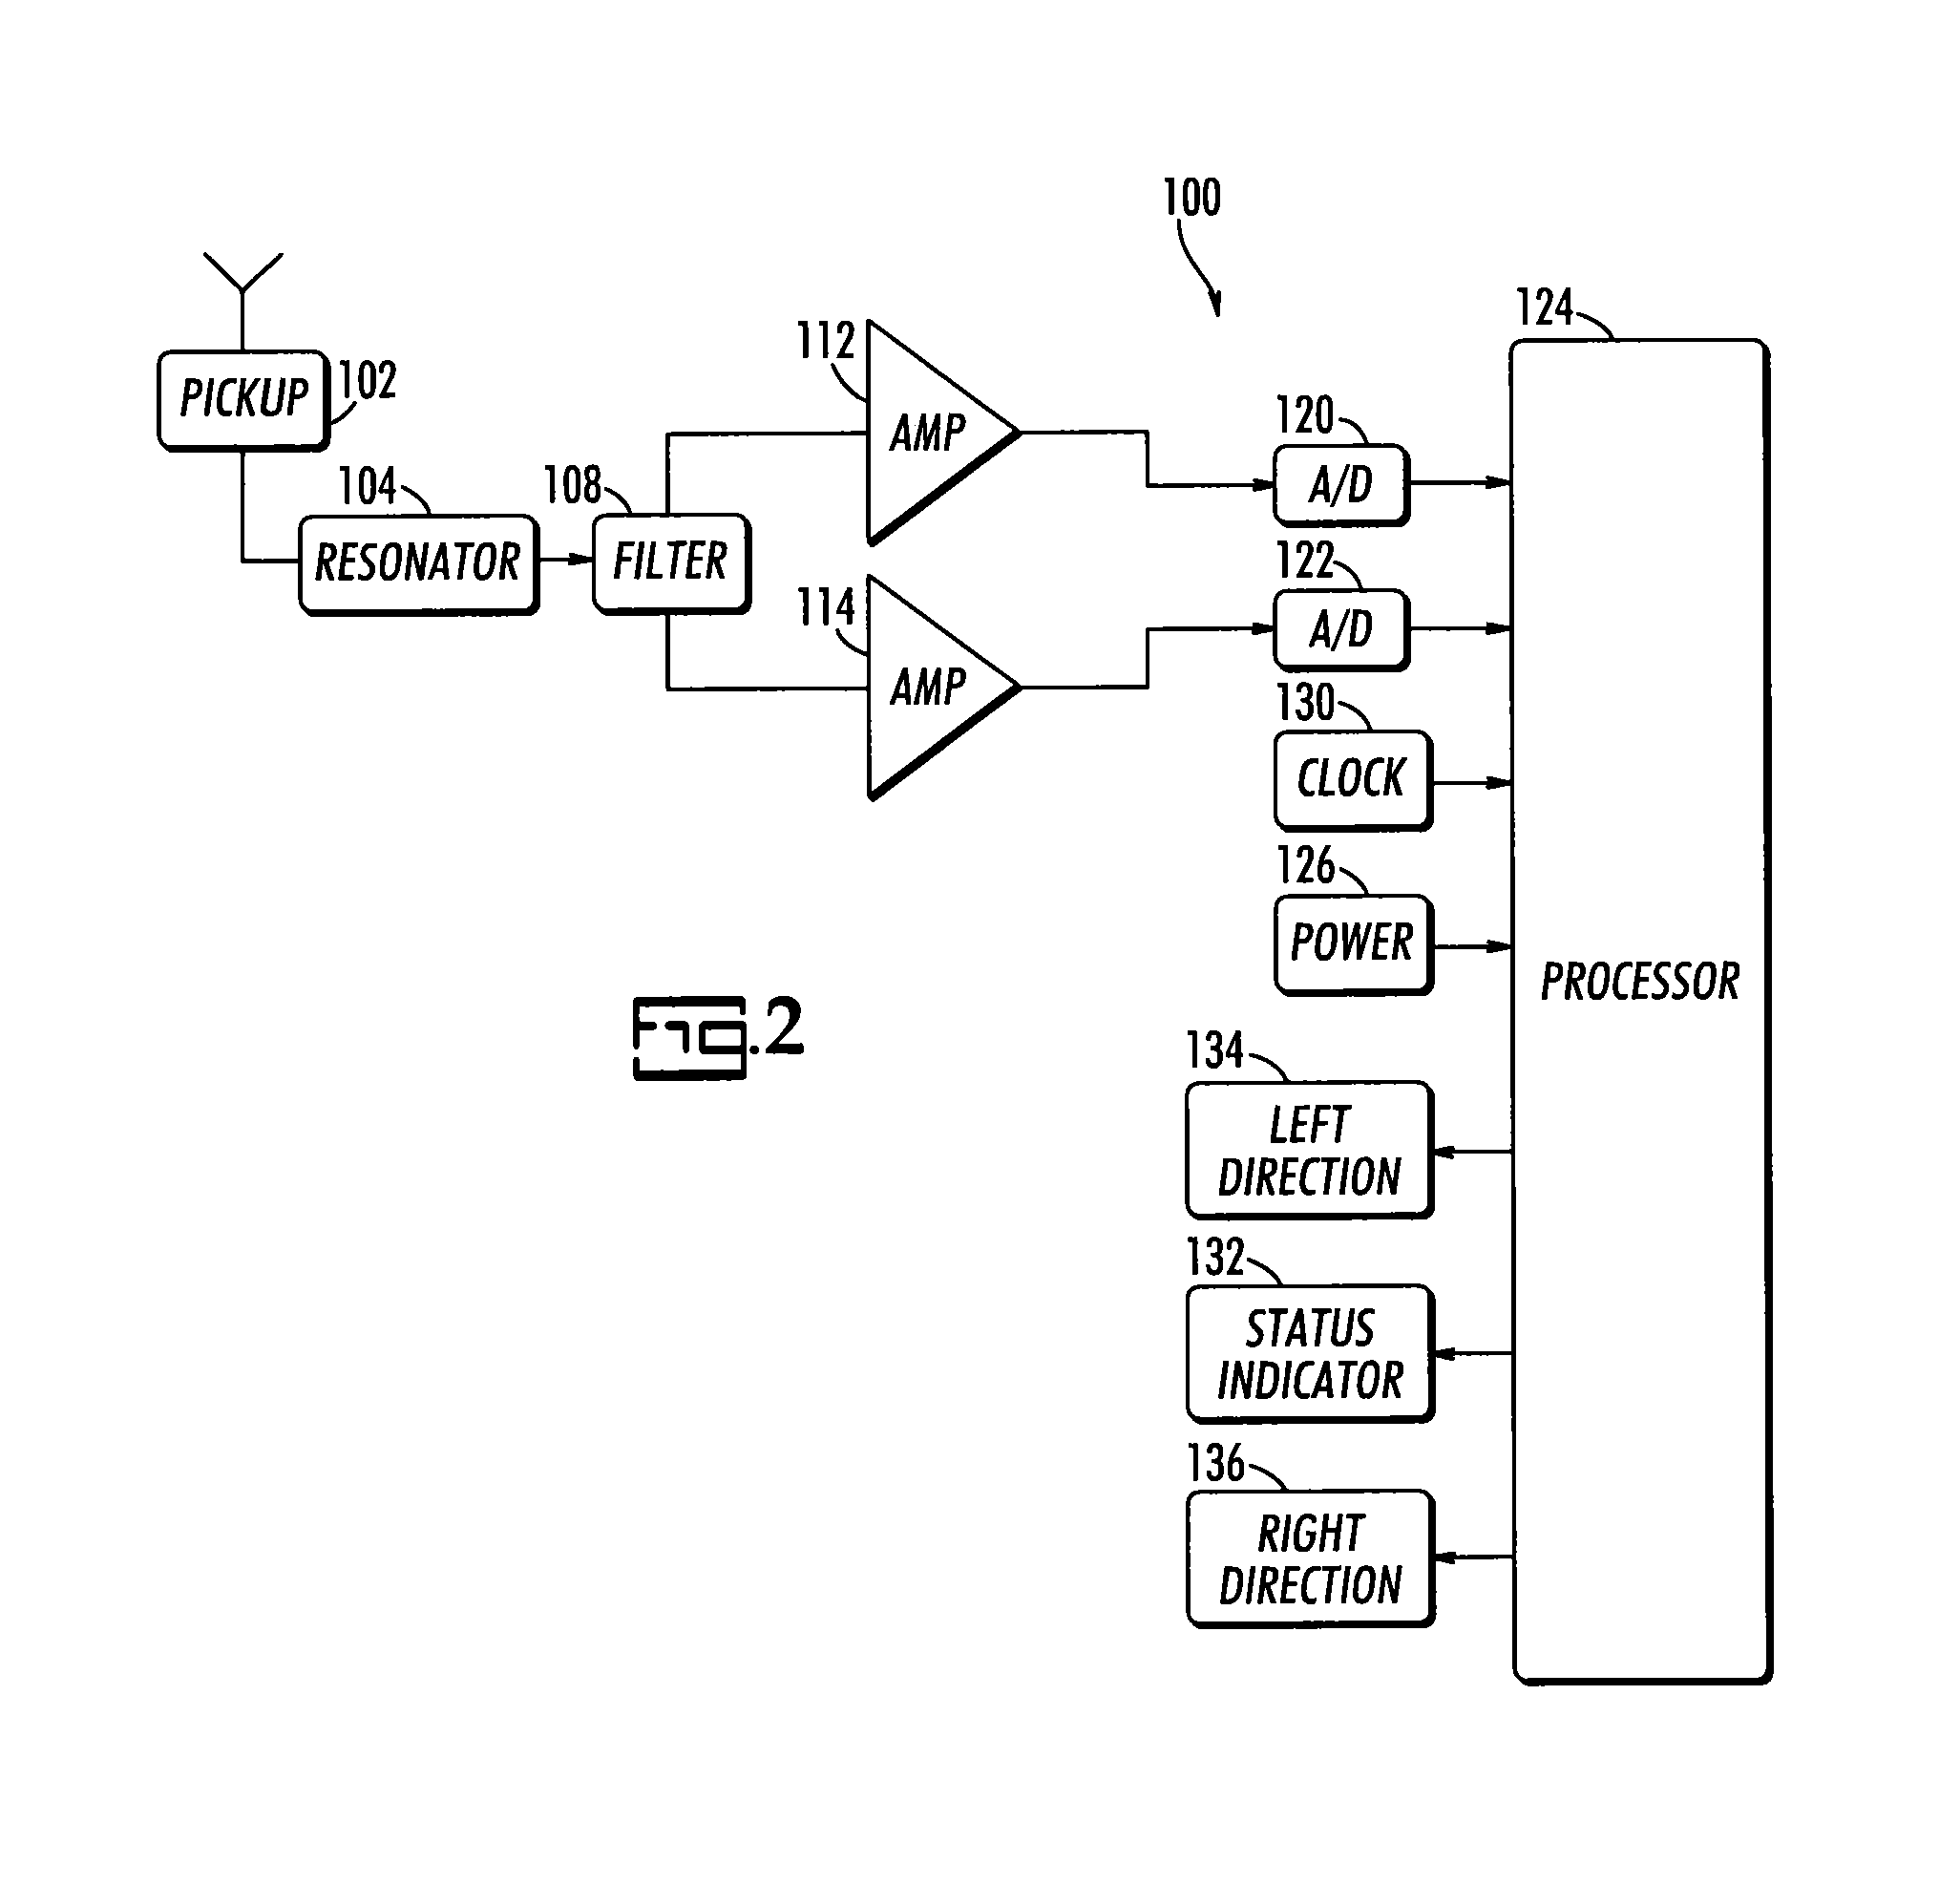 Electrical power transfer indicator system and method